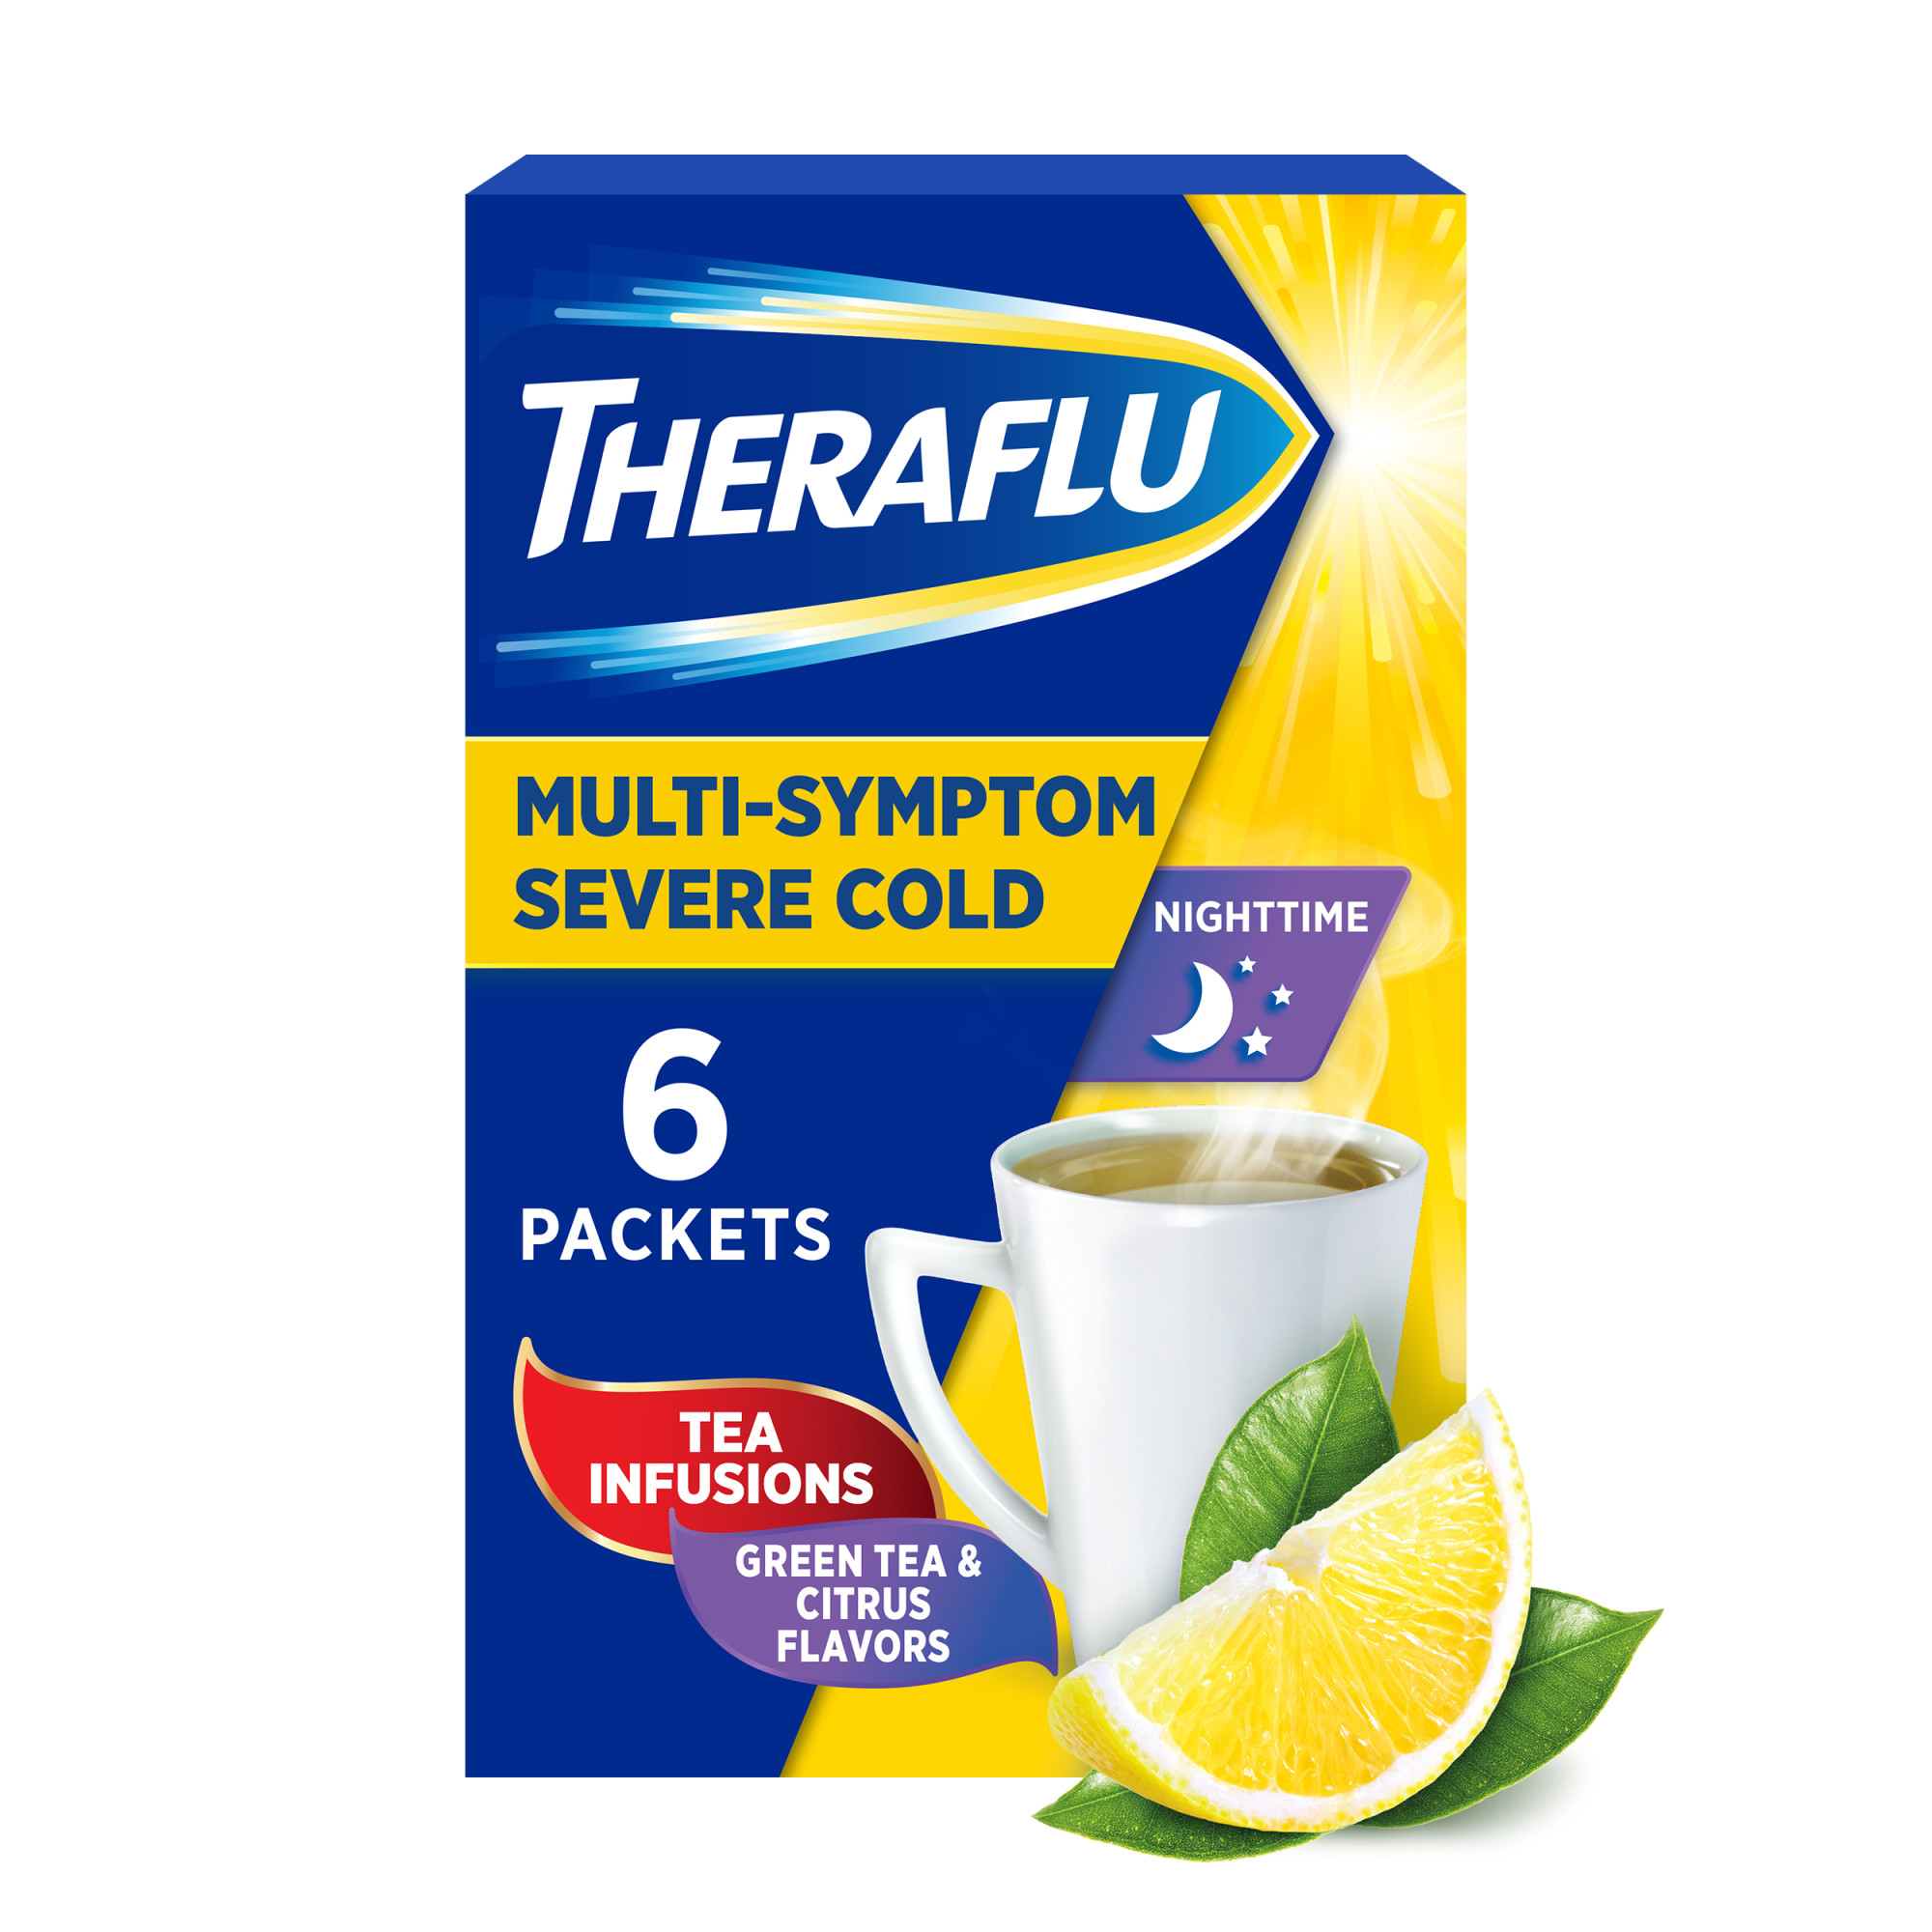 Theraflu Severe Cough Cold and Flu Nighttime Relief Medicine Powder, Green Tea and Citrus, 6 Count - image 1 of 12